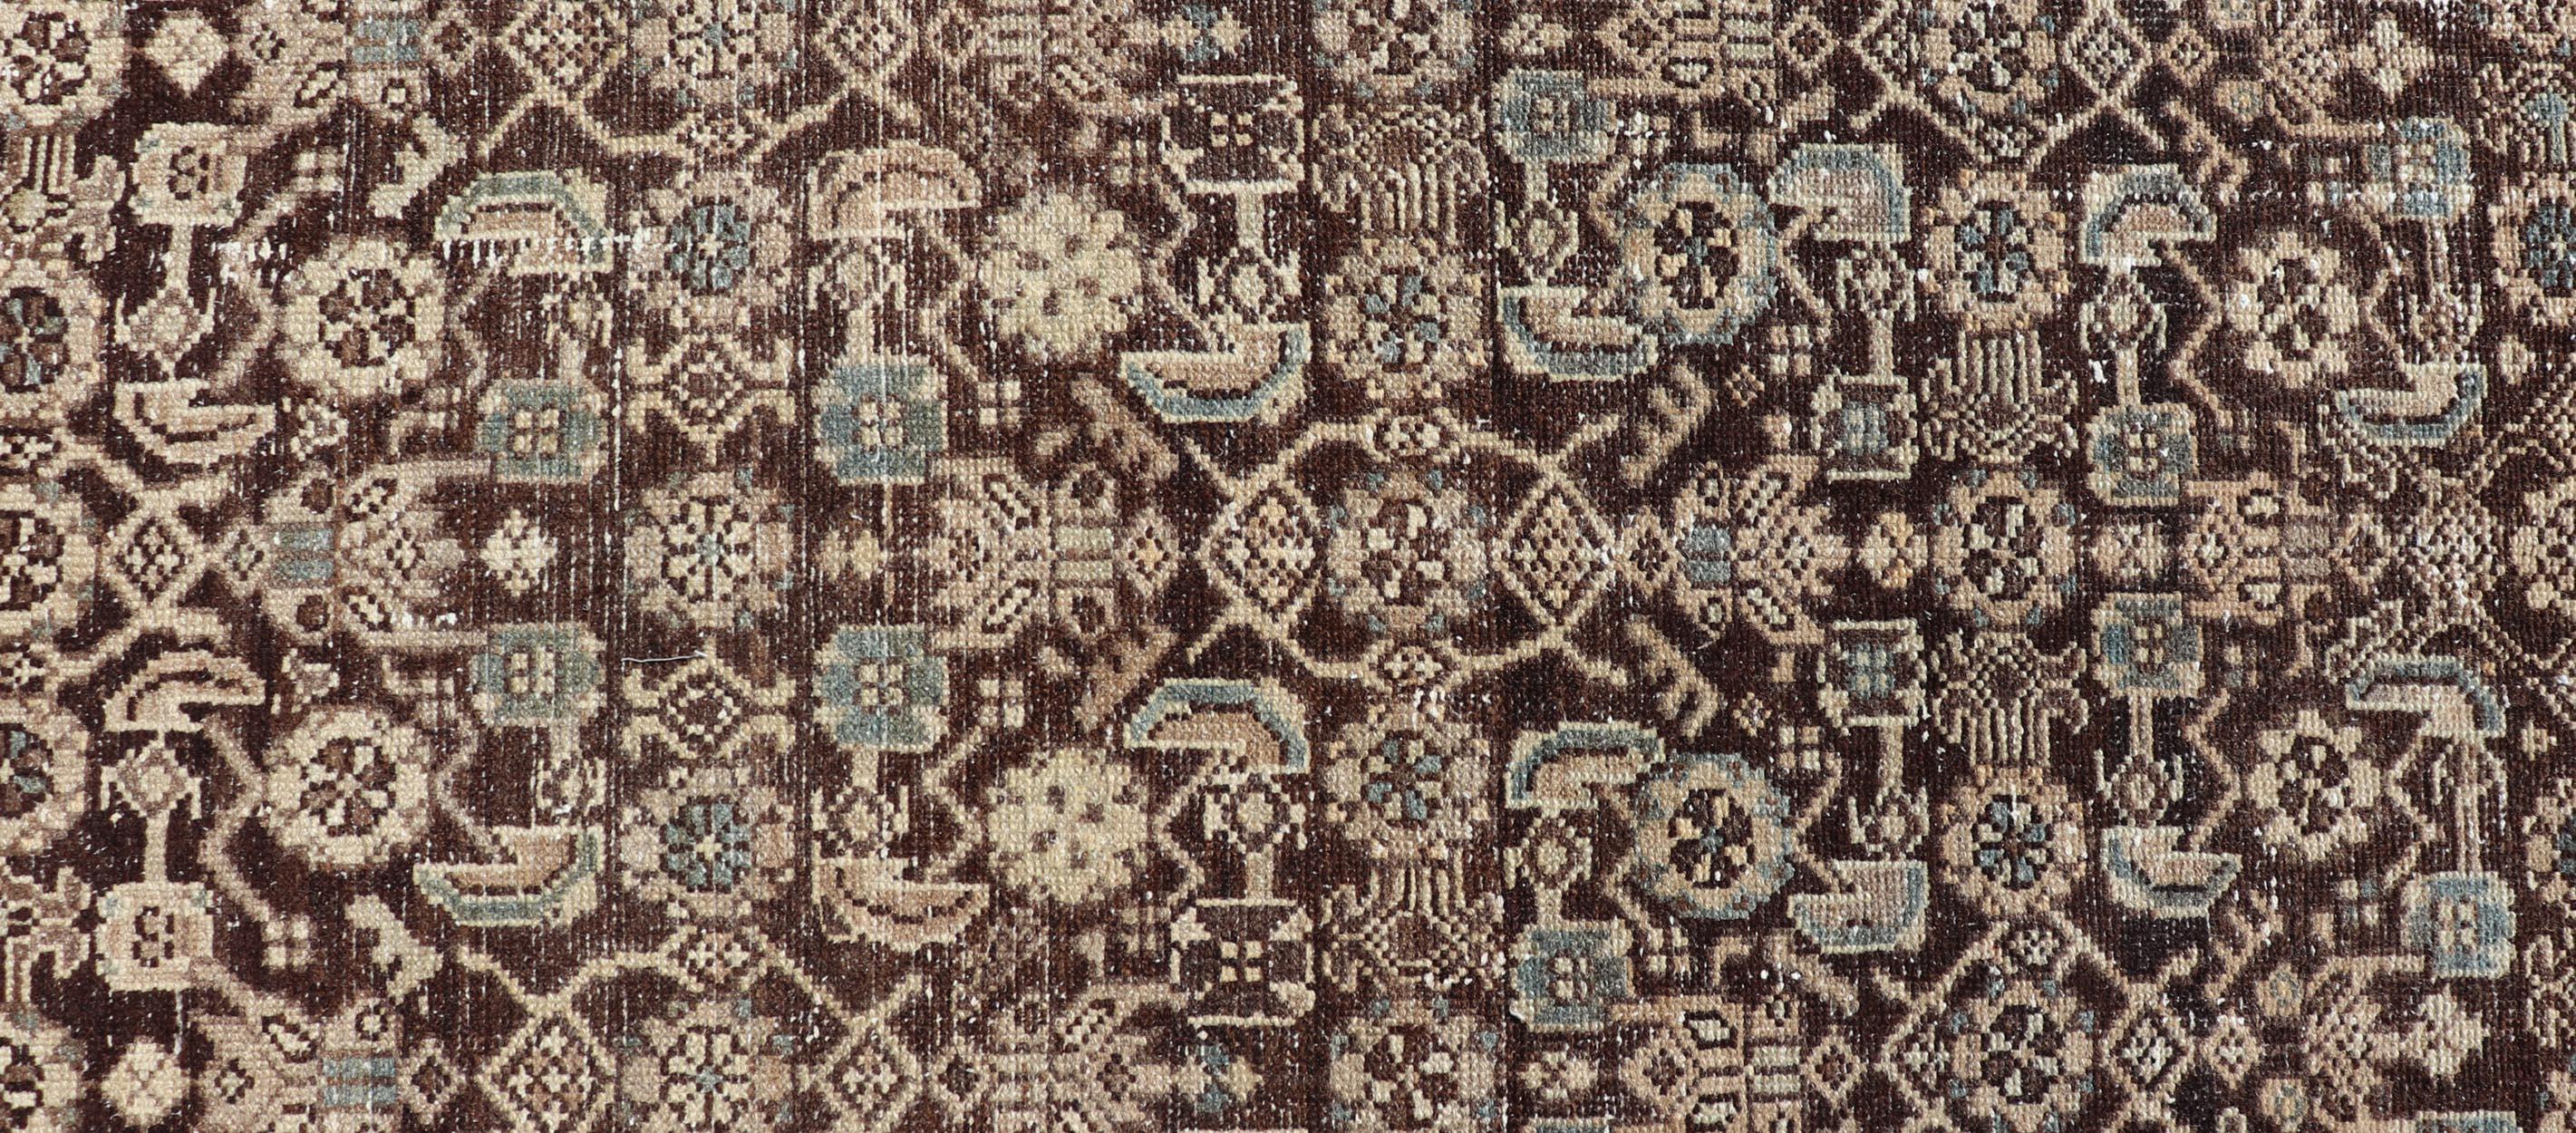 Antique Persian Hamadan Runner in Warm Tones of Grey, Brown, and L. Brown For Sale 3